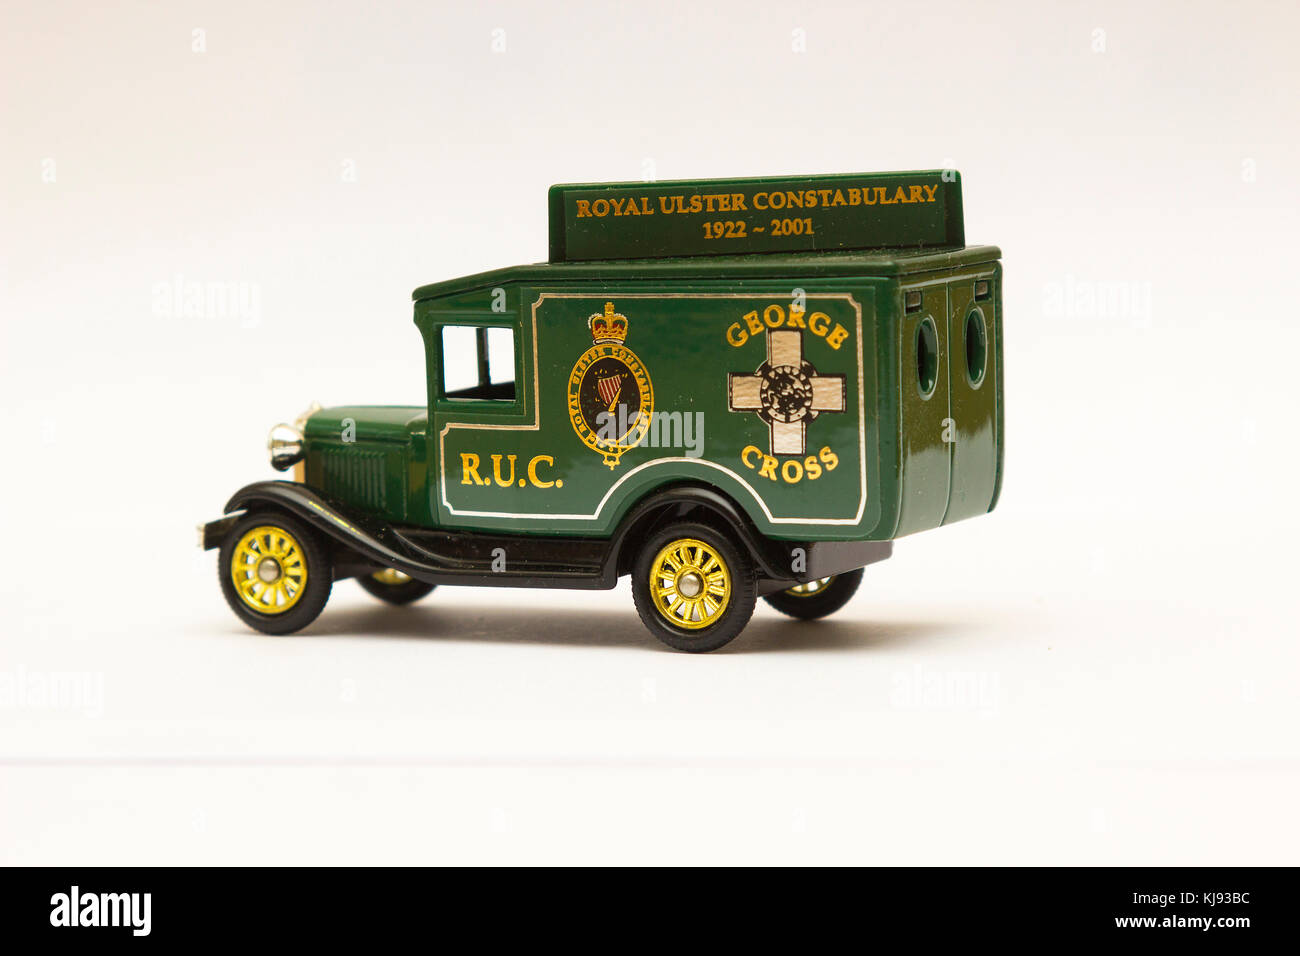 A die cast model of an old Ford Van in the livery of the now disbanded Royal Ulster Constabulary the only armed police force in the United Kingdom Stock Photo